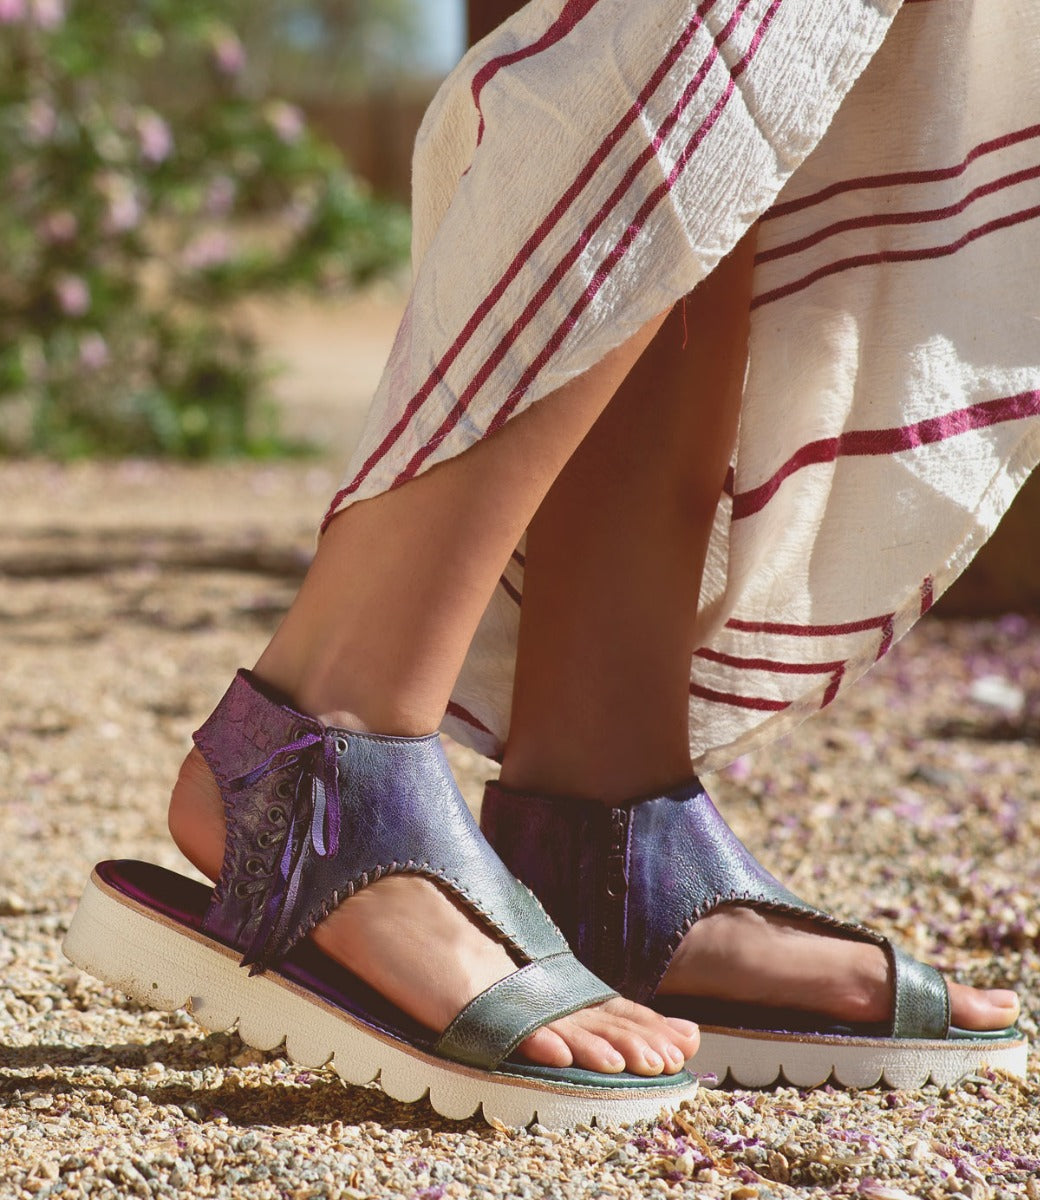 A woman's feet in a pair of Bed Stu Zoe II sandals.